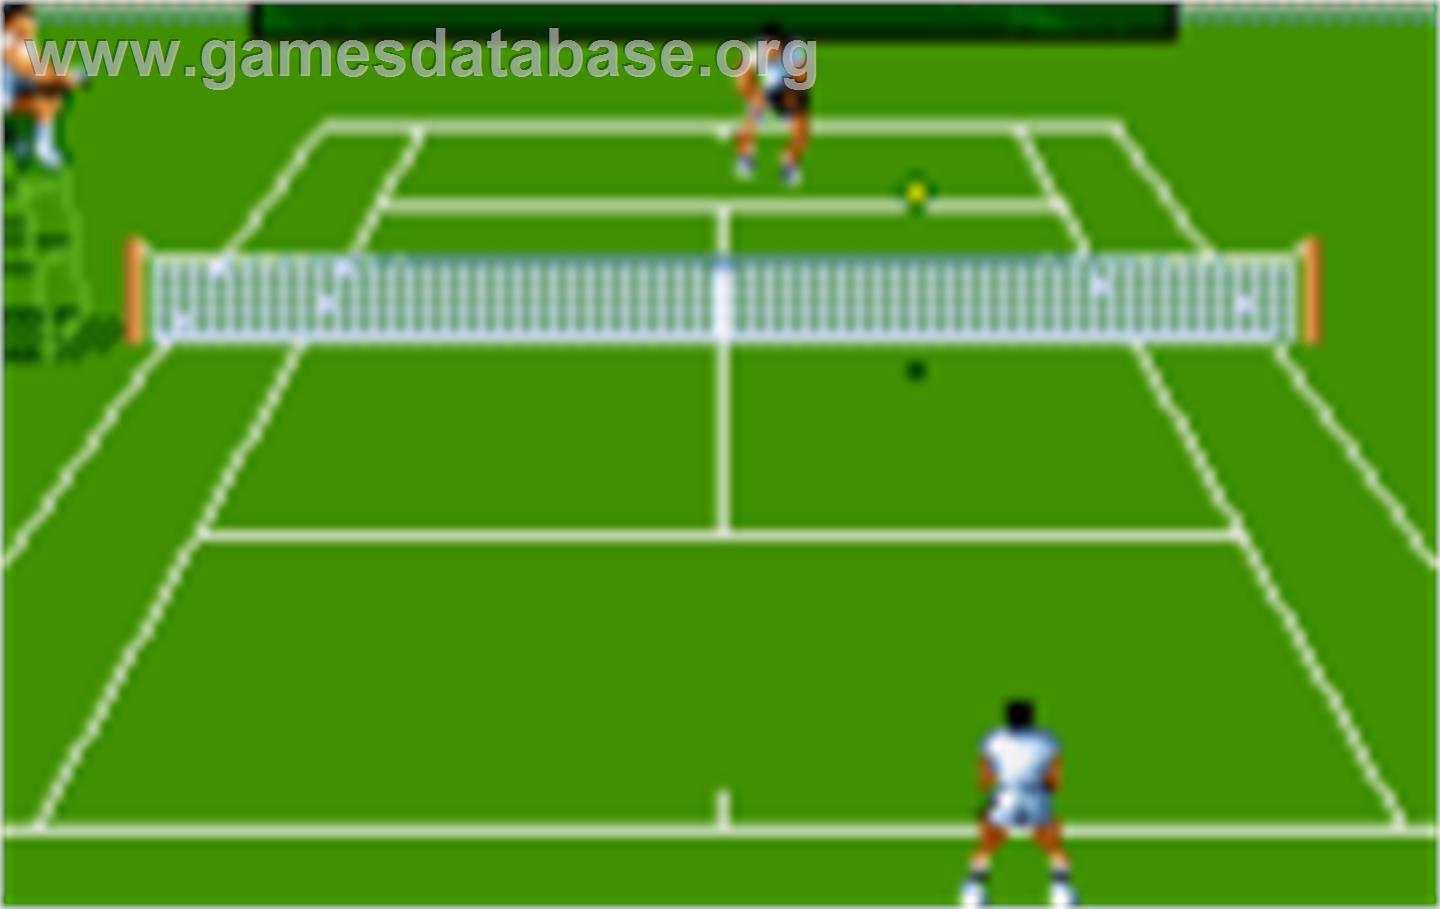 Jimmy Connors Pro Tennis Tour - Atari Lynx - Artwork - In Game